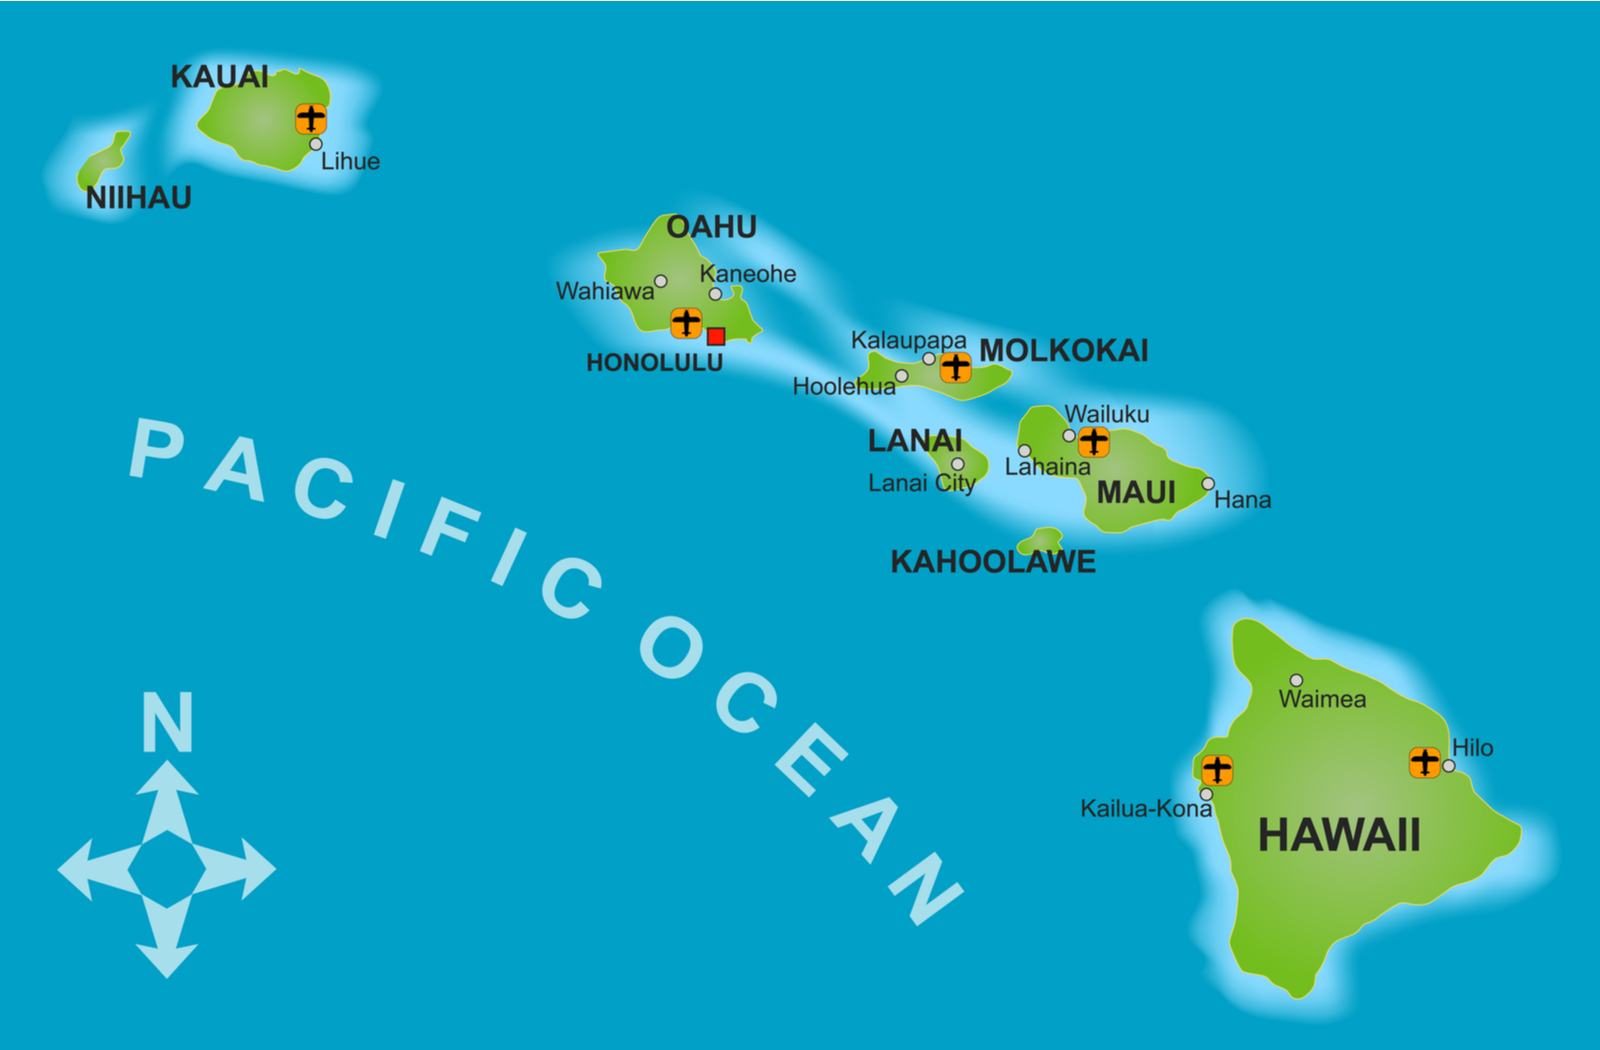 Cool map of the Hawaiian Islands in graphical form